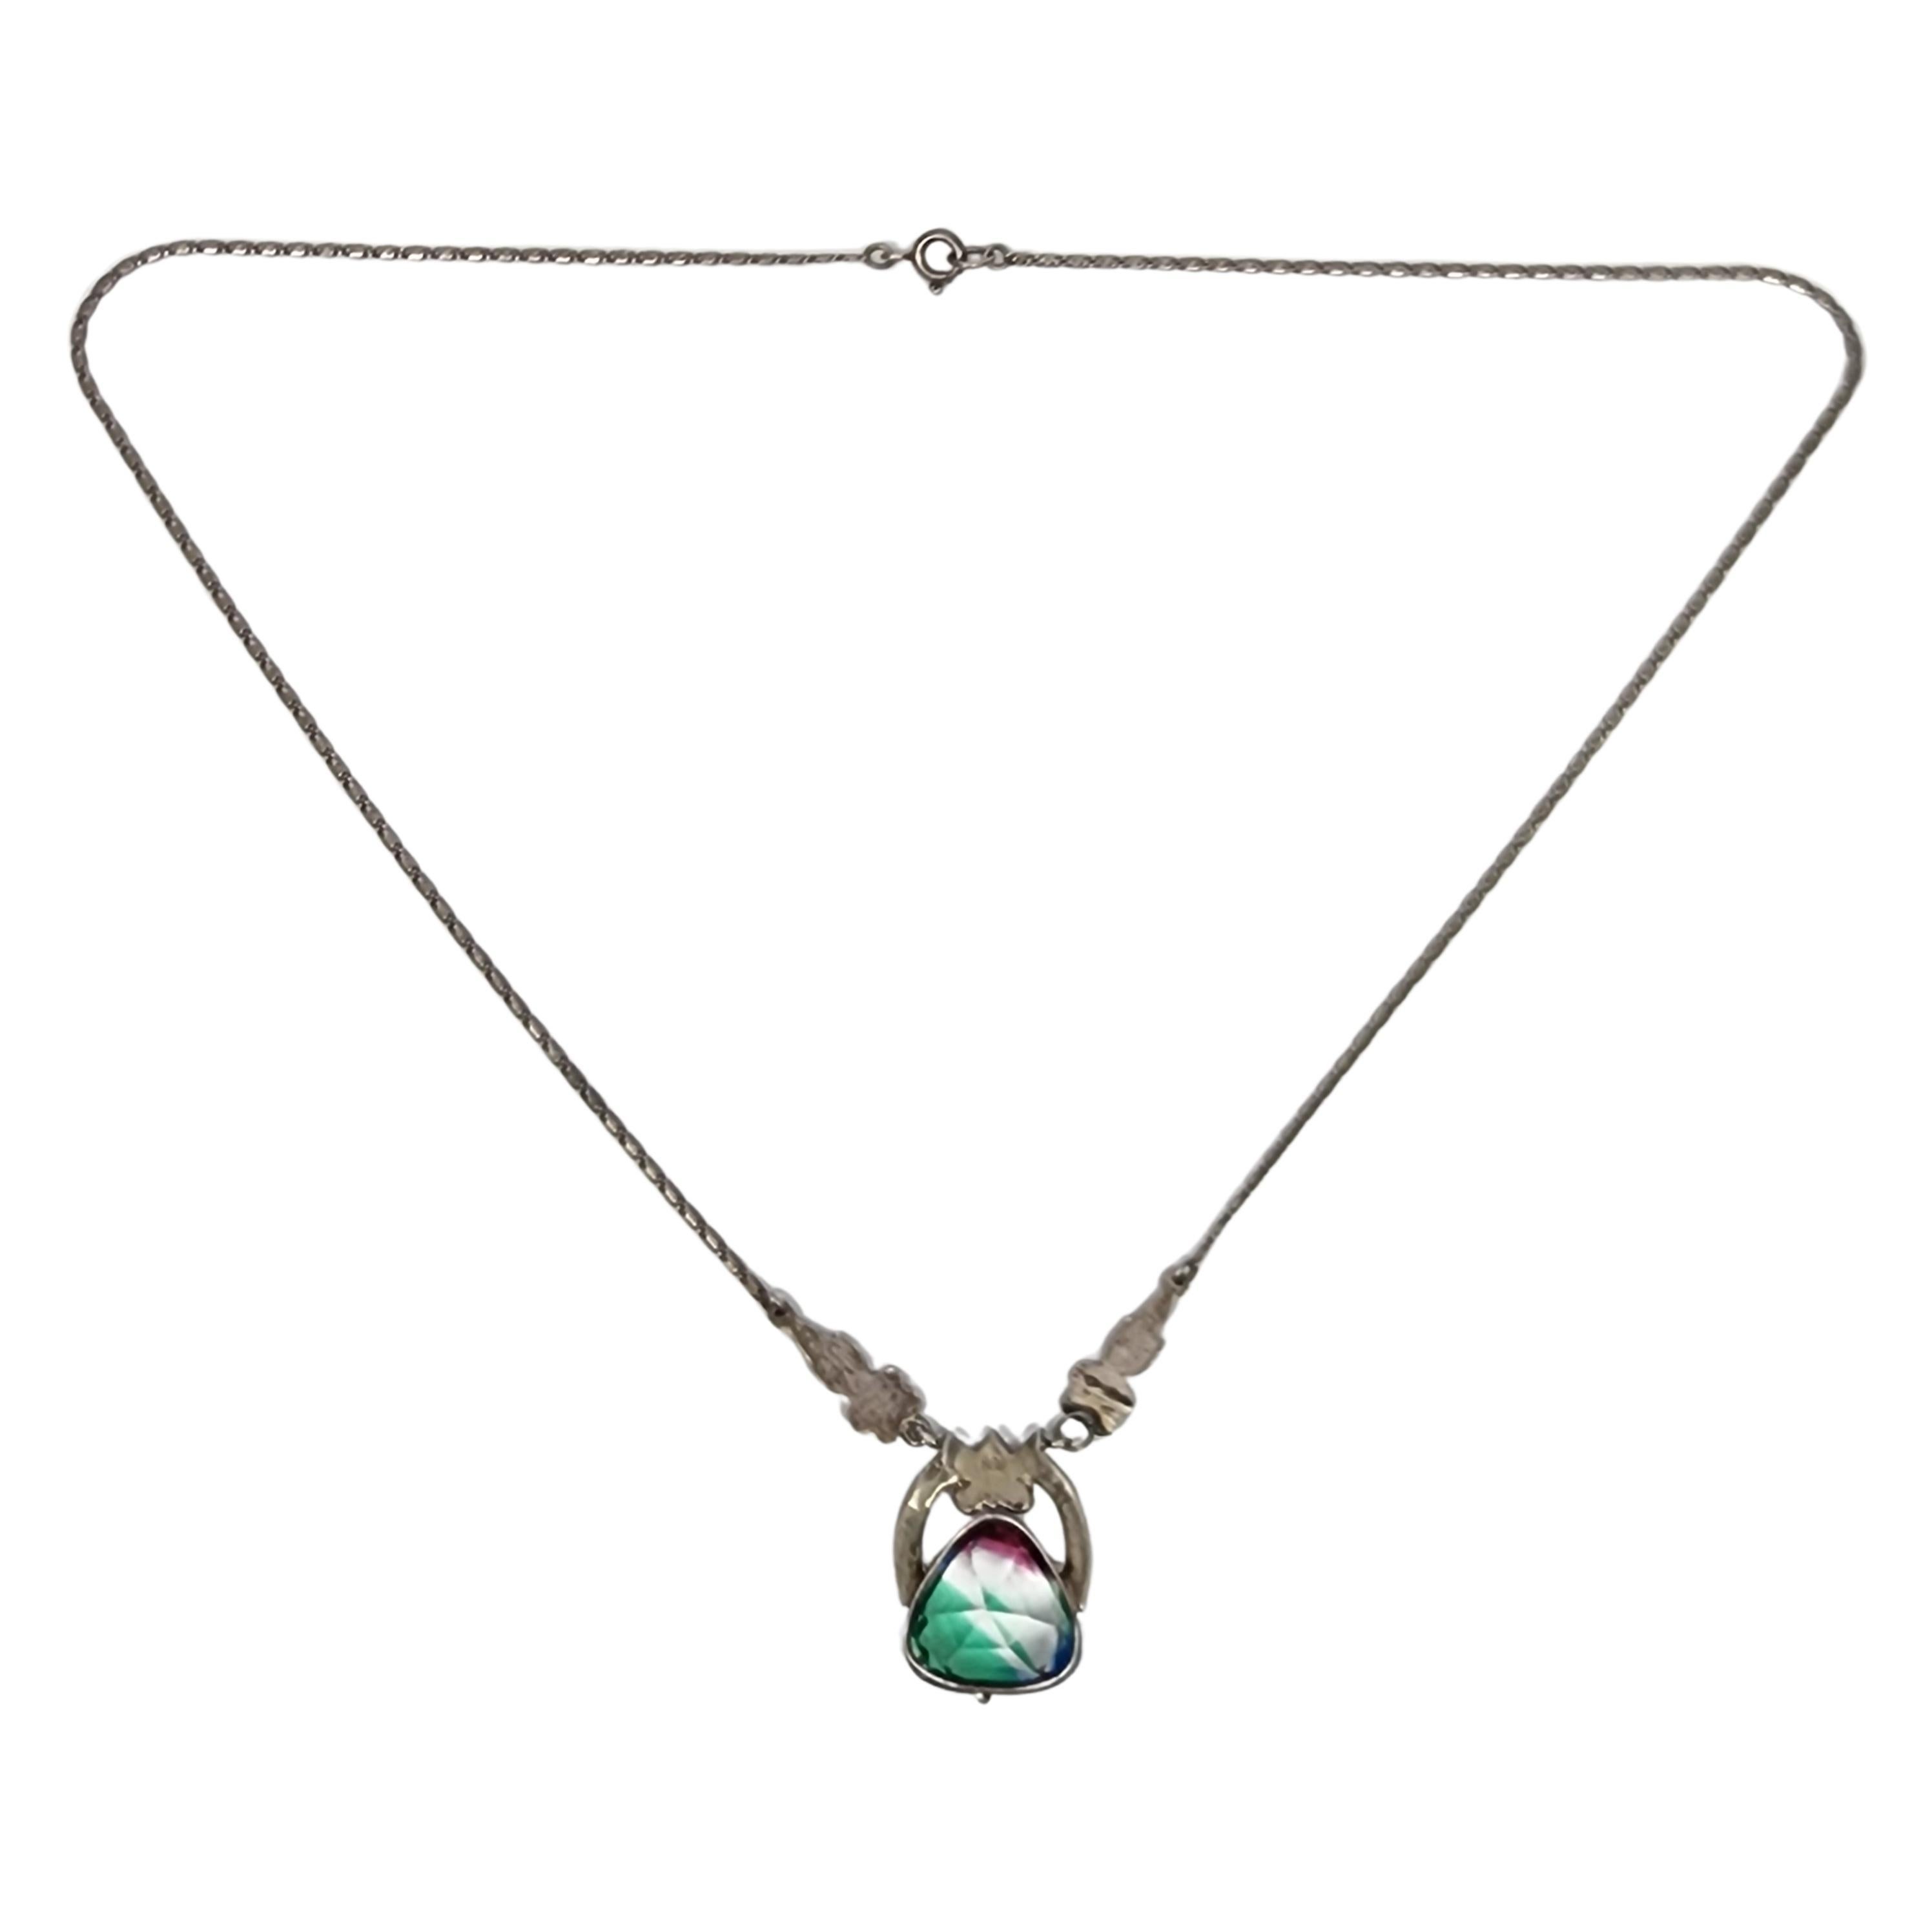 830 silver Iris Glass and marcasite pendant necklace.

A beautiful faceted iris glass triangle stone that features pink, blue and green colors. The stone is set in 830 silver with marcasite hanging from a coil link chain.

Weighs approx 6.5g, 4.2dwt